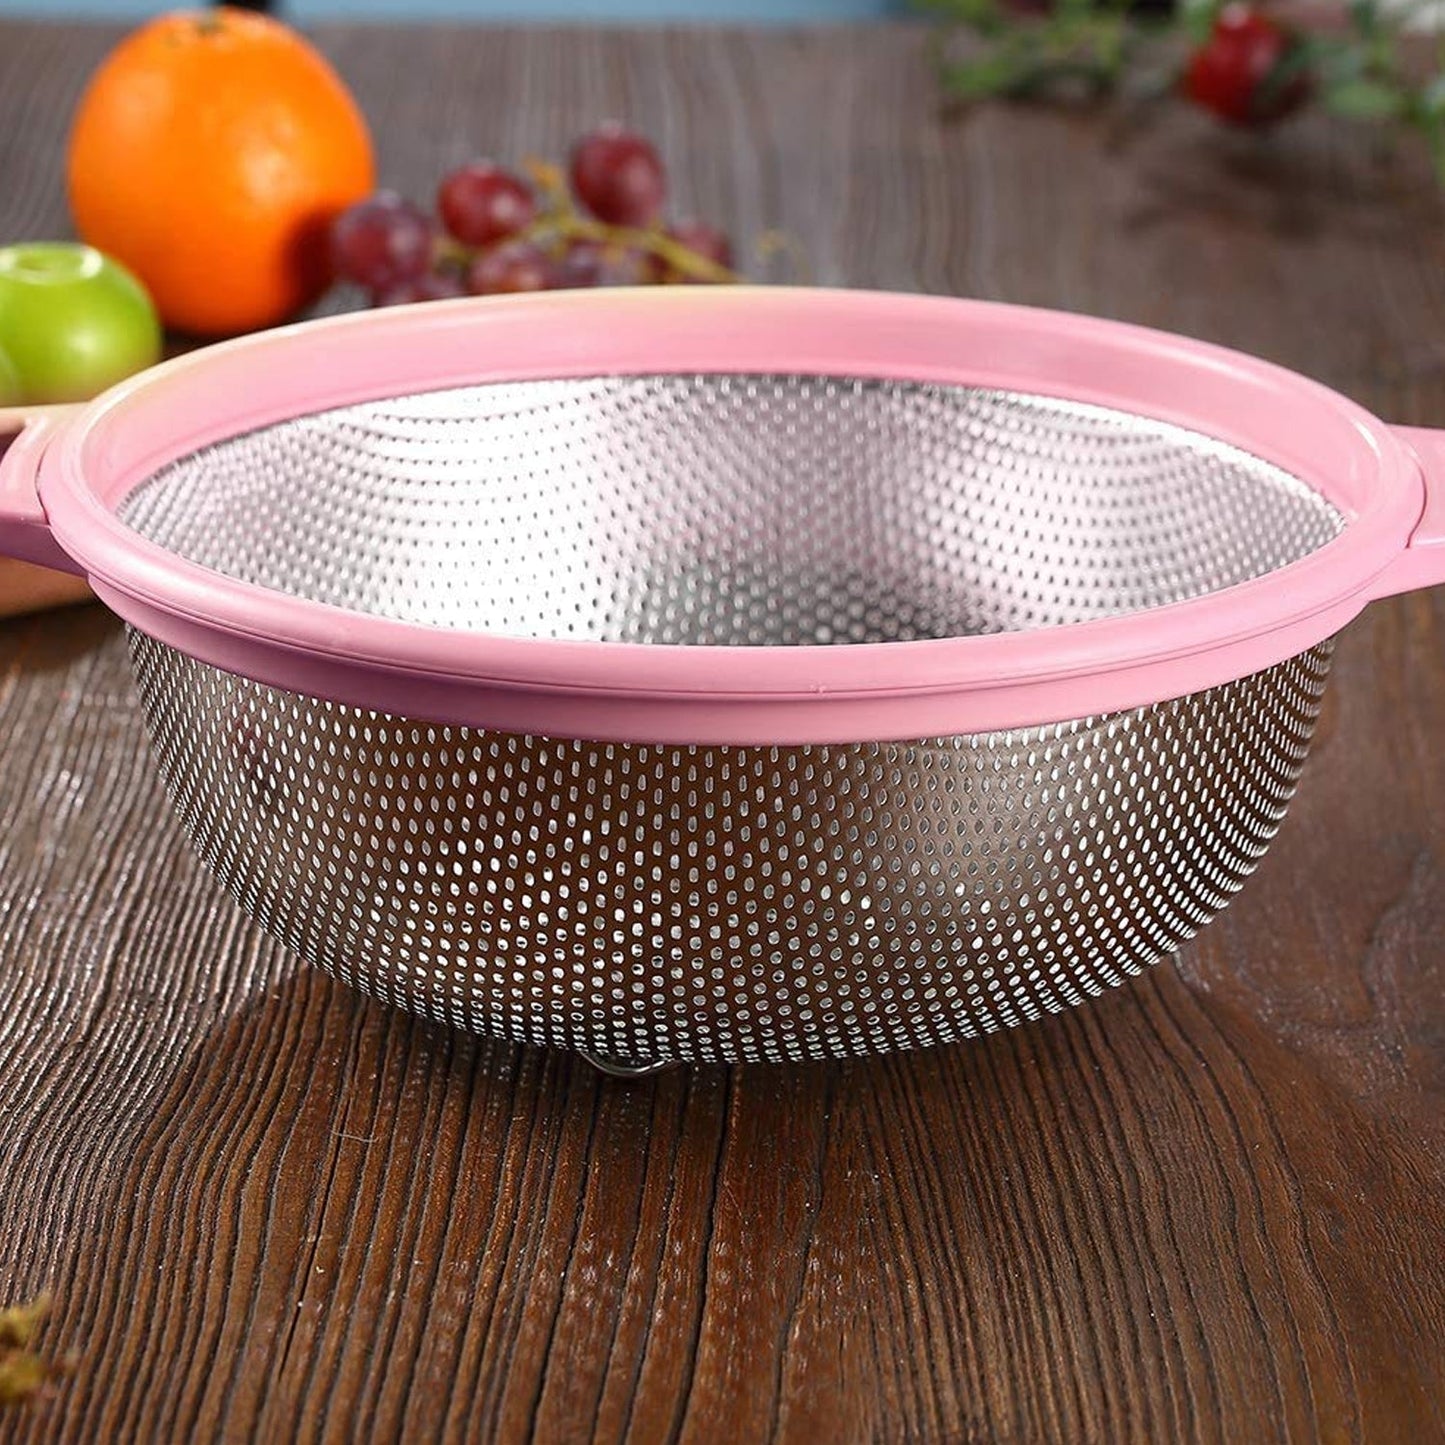 7145 Stainless Steel Colander with Handle, Large Metal Green Strainer for Pasta, Spaghetti, Berry, Veggies, Fruits,  Kitchen Food Colander, Dishwasher Safe DeoDap